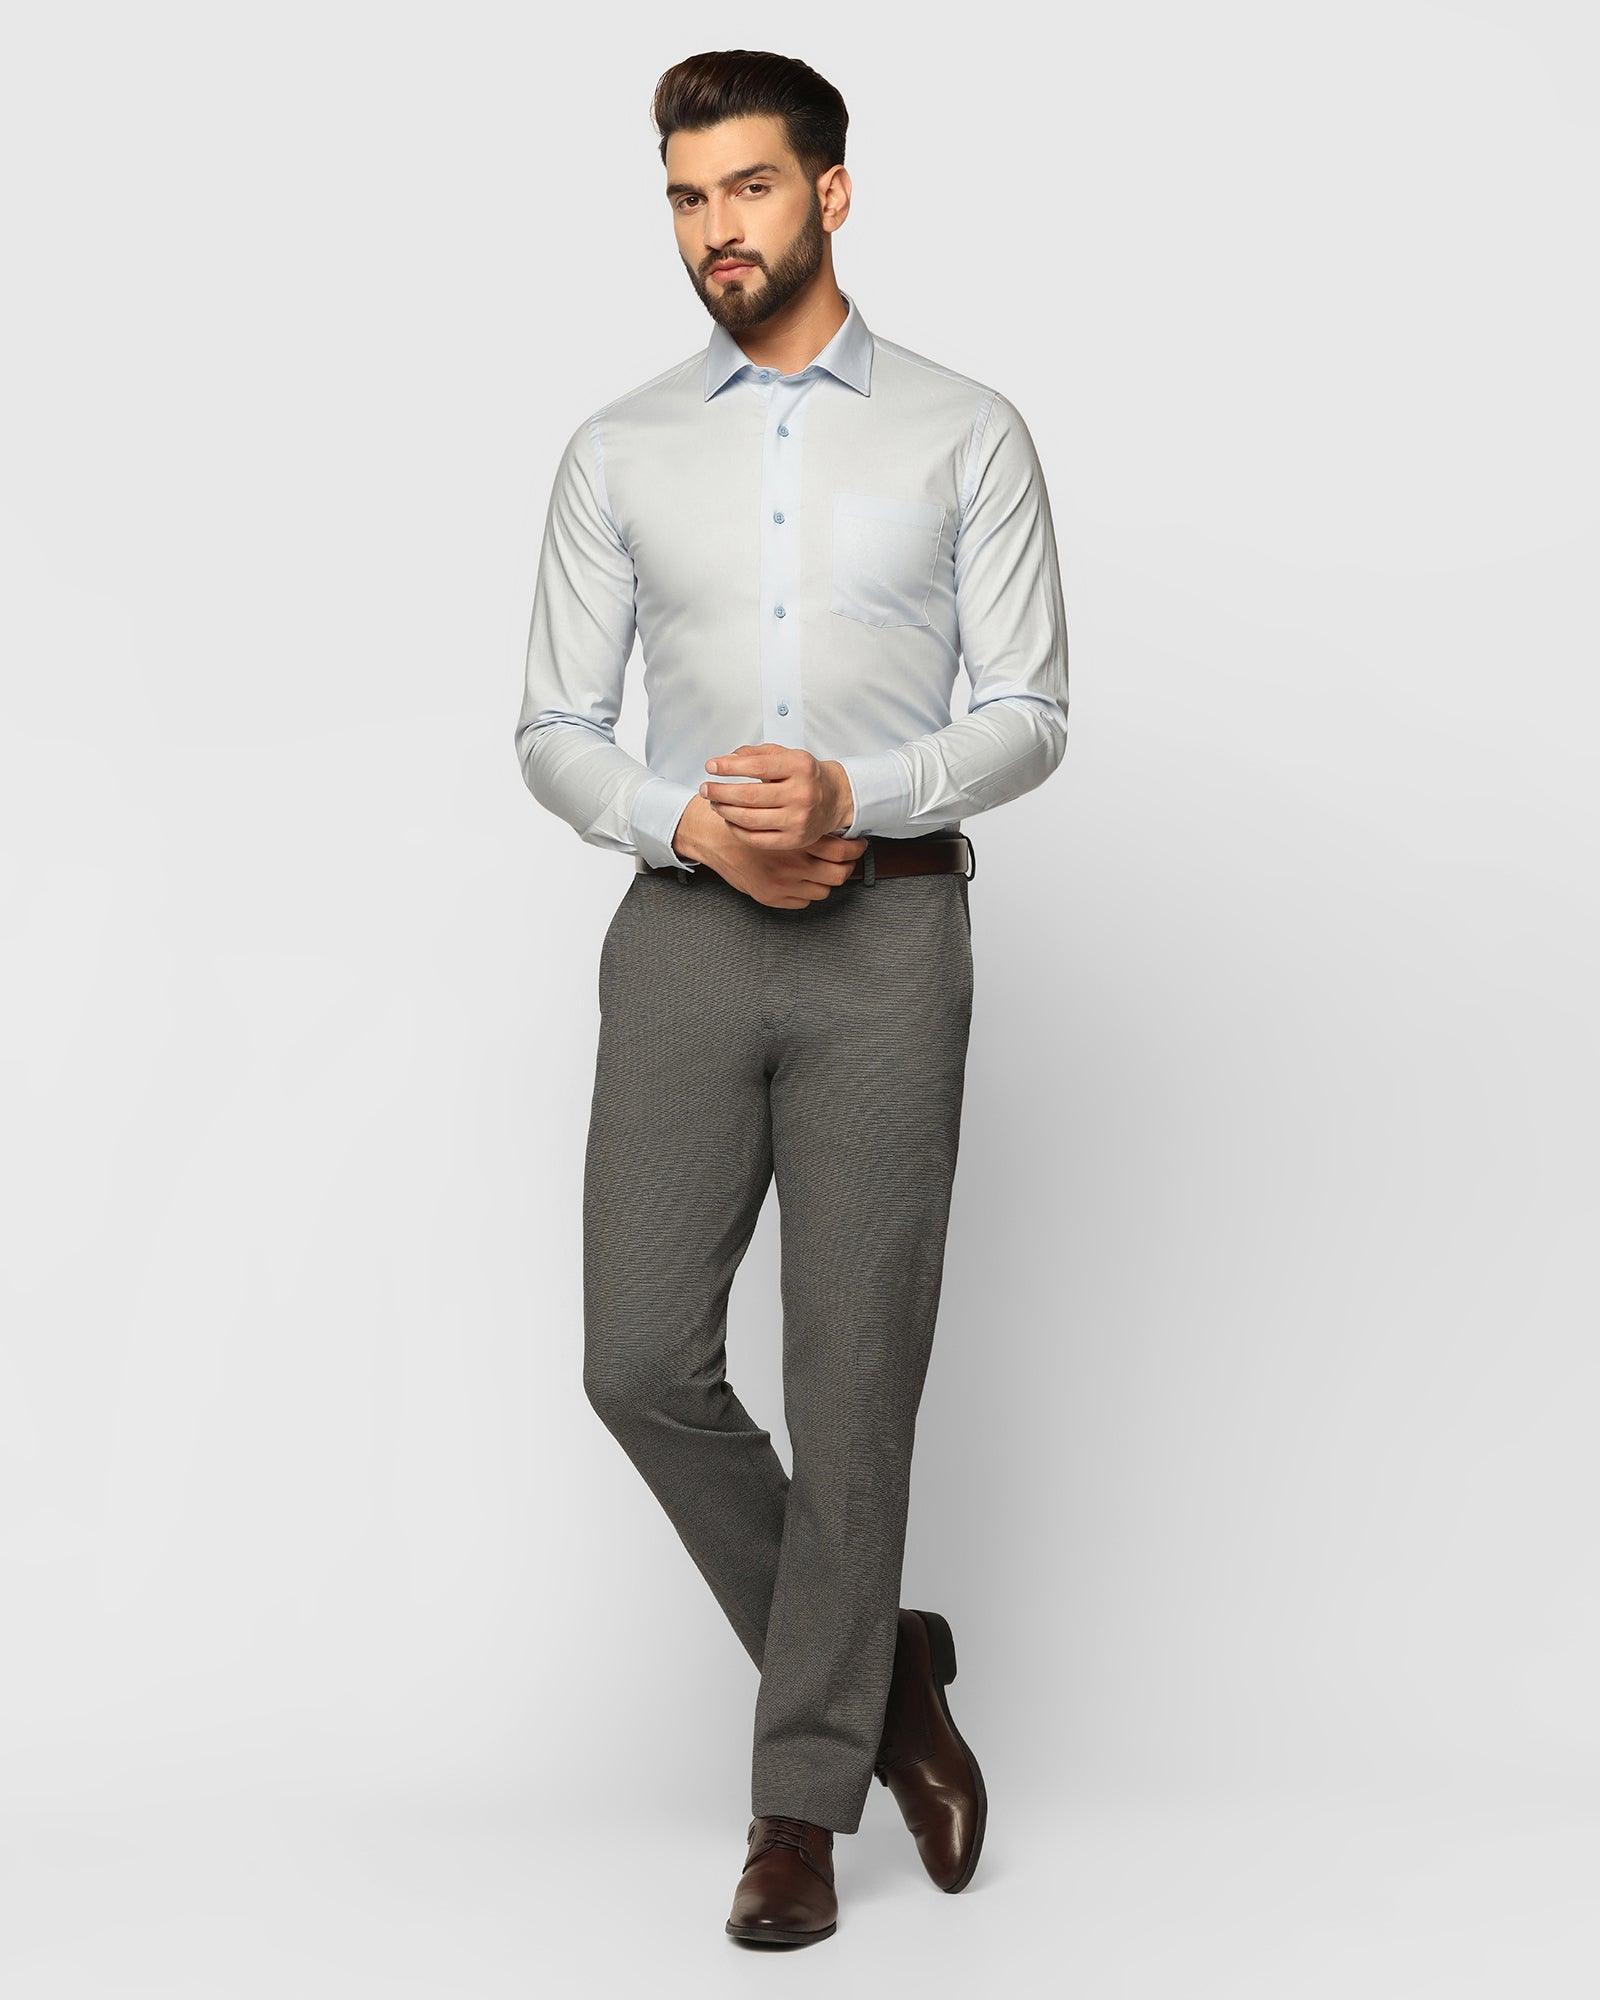 Second Life Marketplace - Mens Grey Sweater, Shirts and Black Trousers